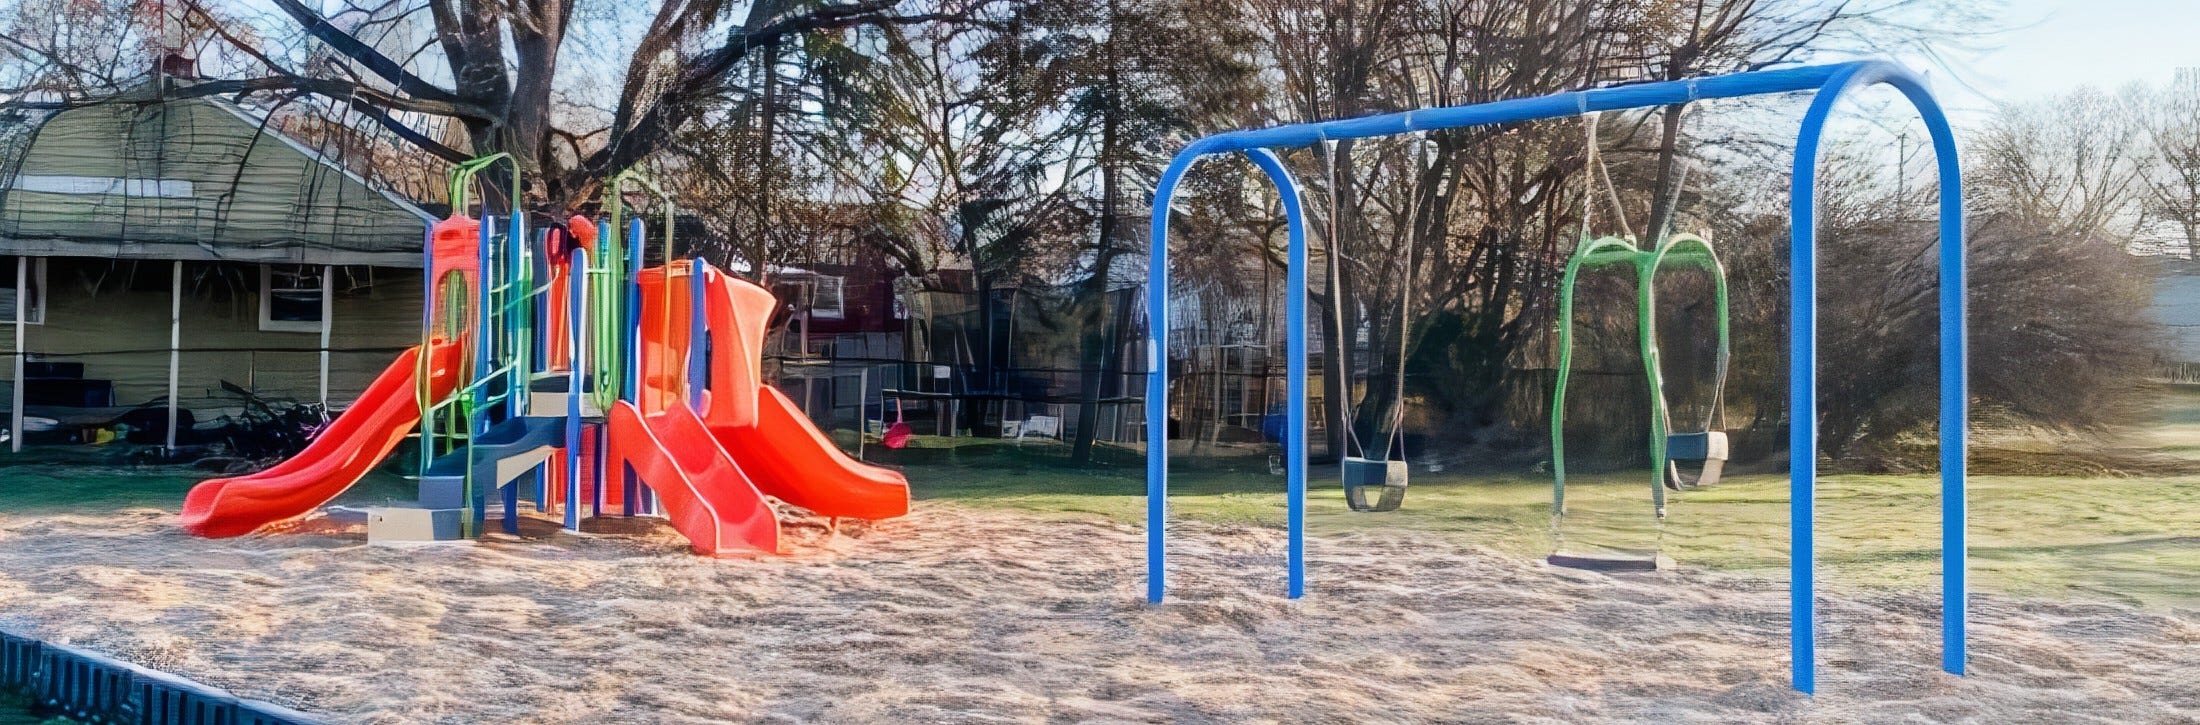 GameTime Playground Grants Bring Play to Springfield, Ohio